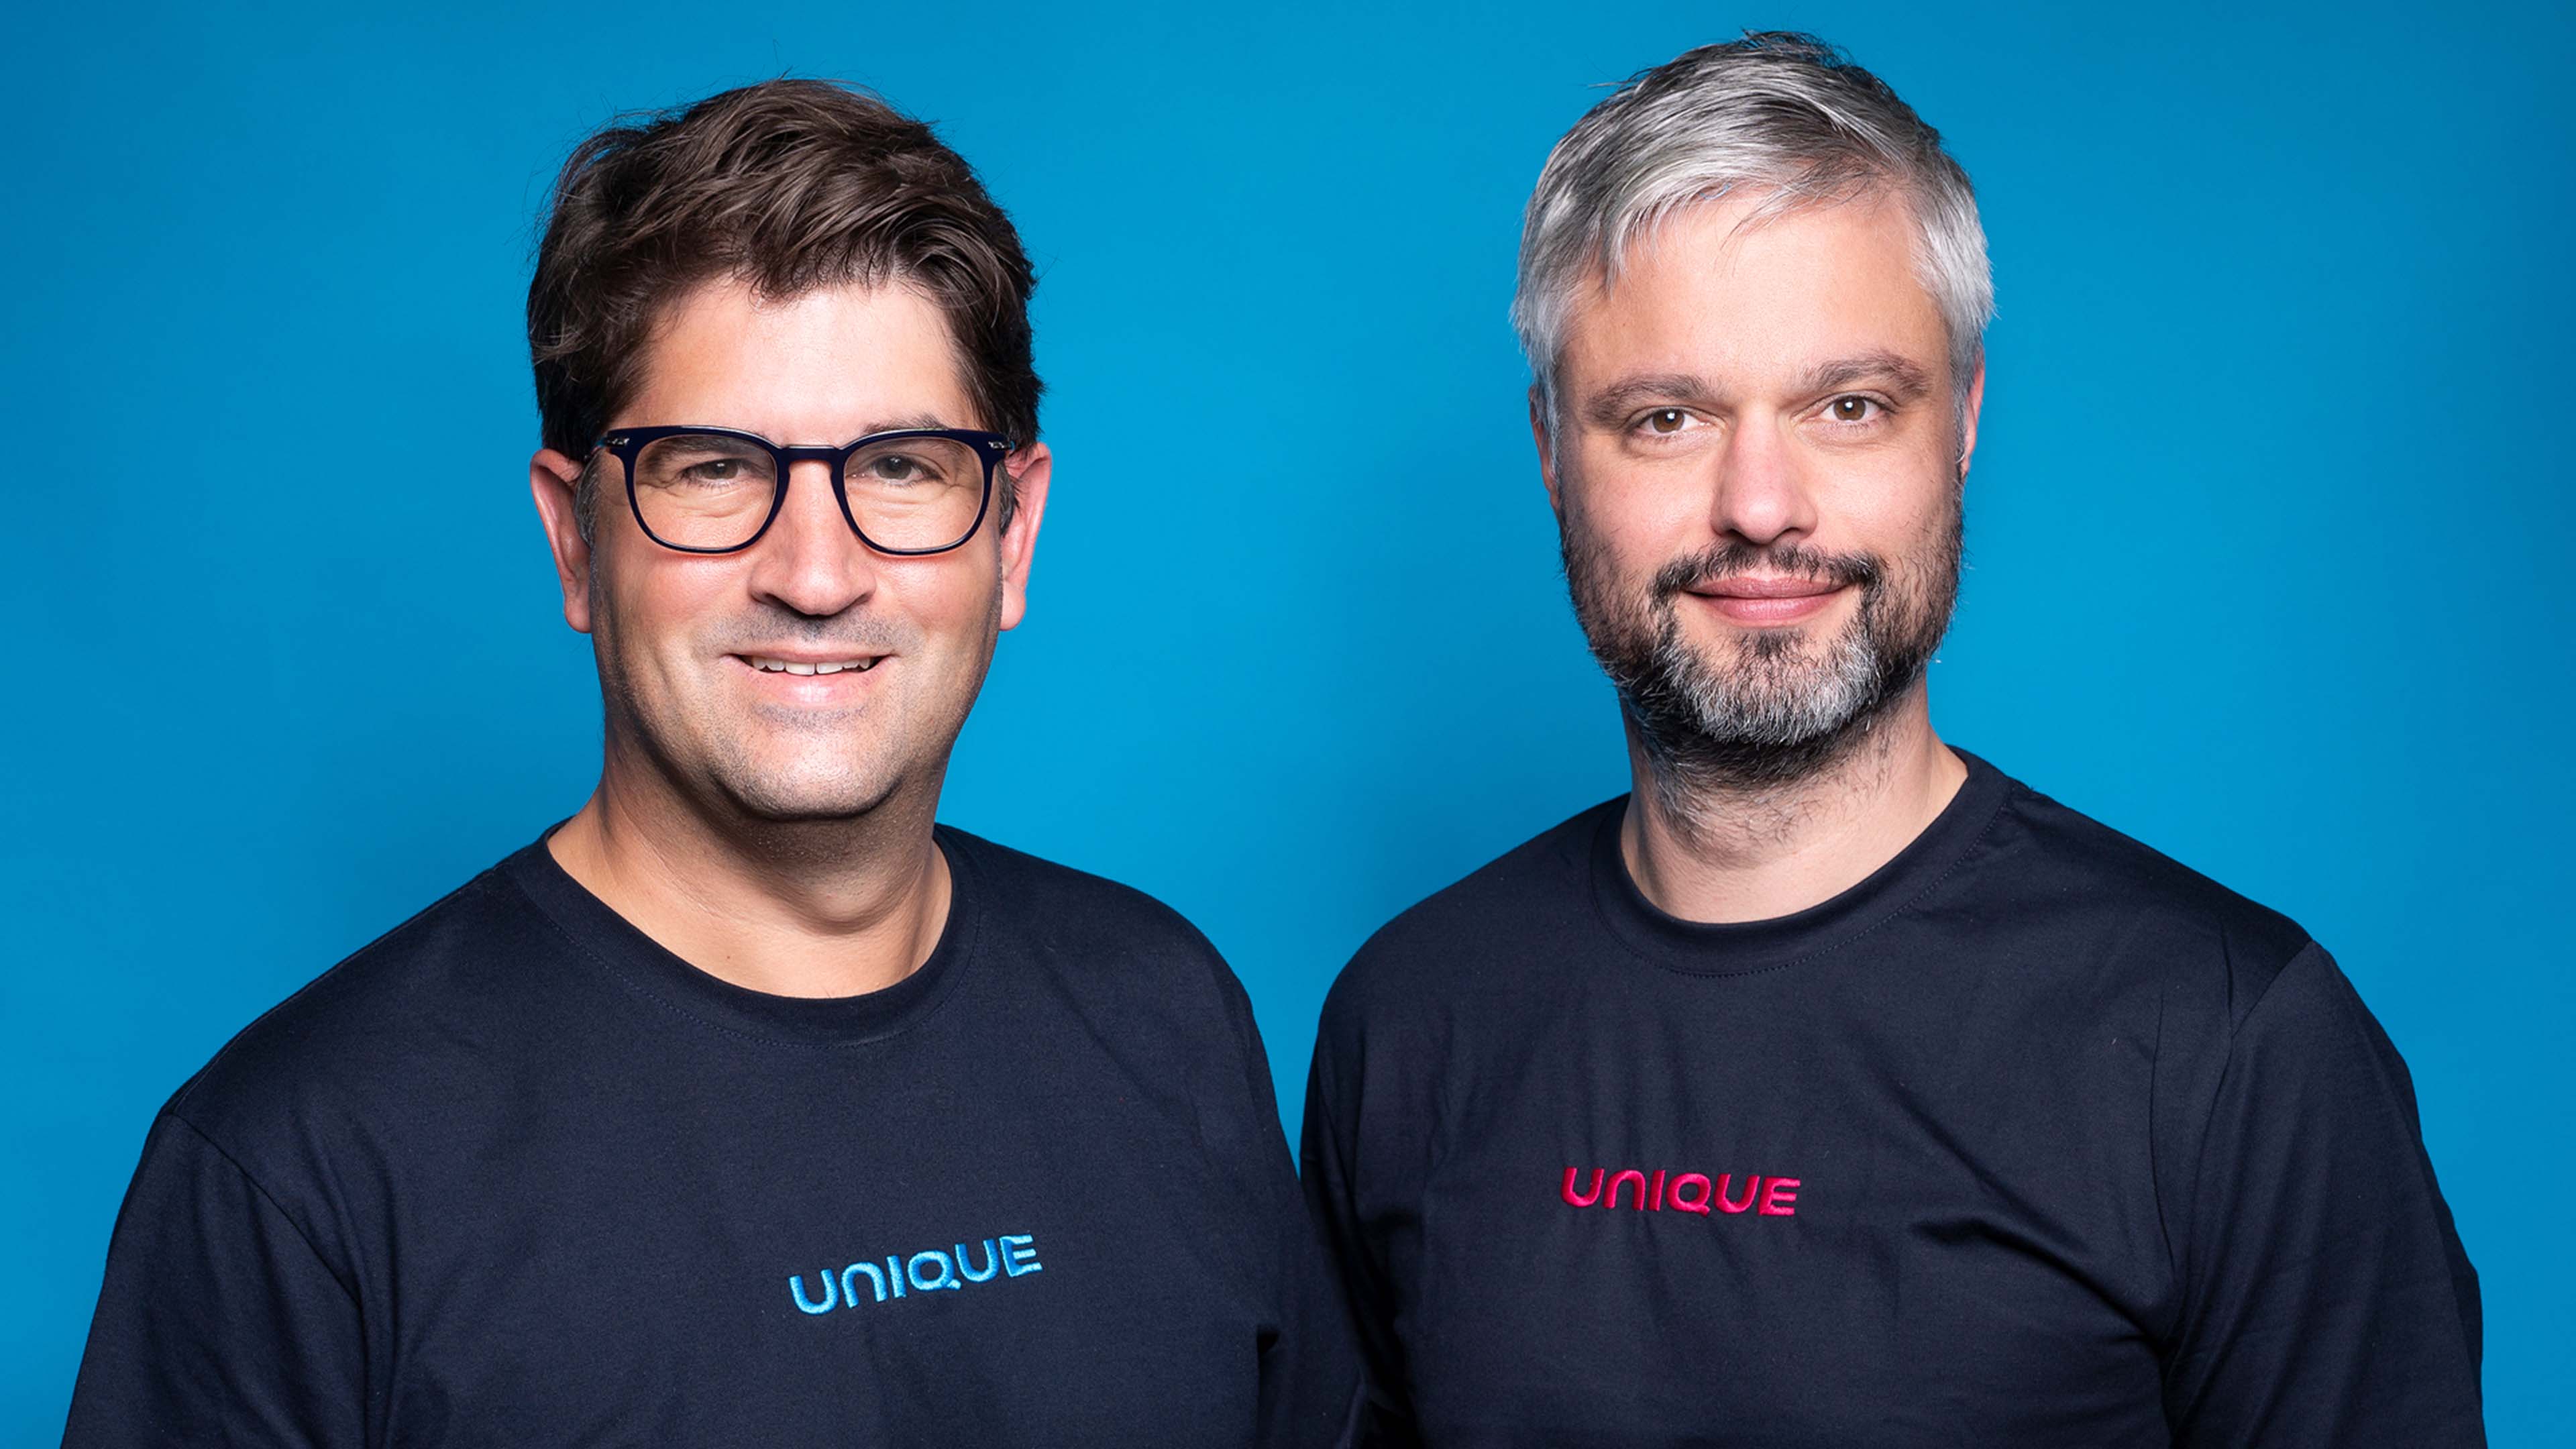 Founders of Unique Manuel Grenacher and Andreas Hauri